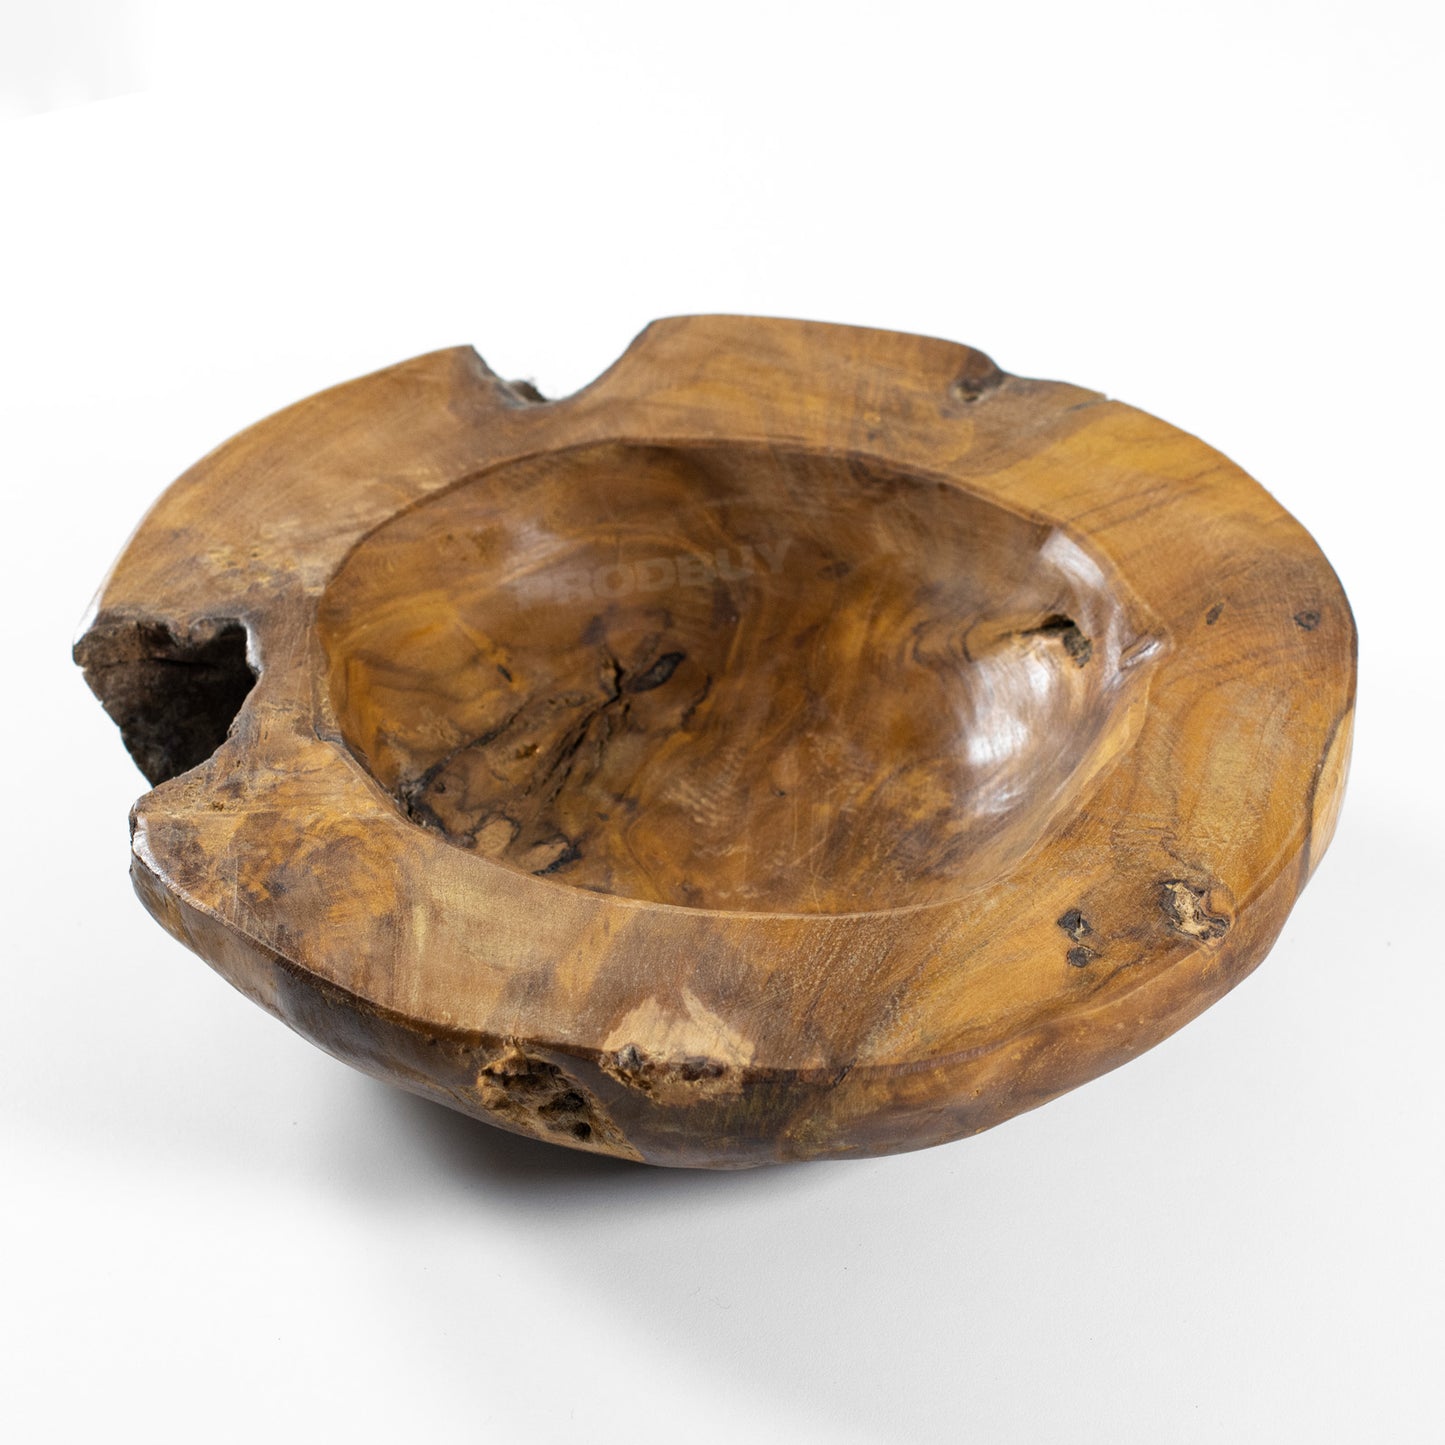 Chunky 30cm Wooden Bowl Hand Carved Teak Root Wood Display Bowls